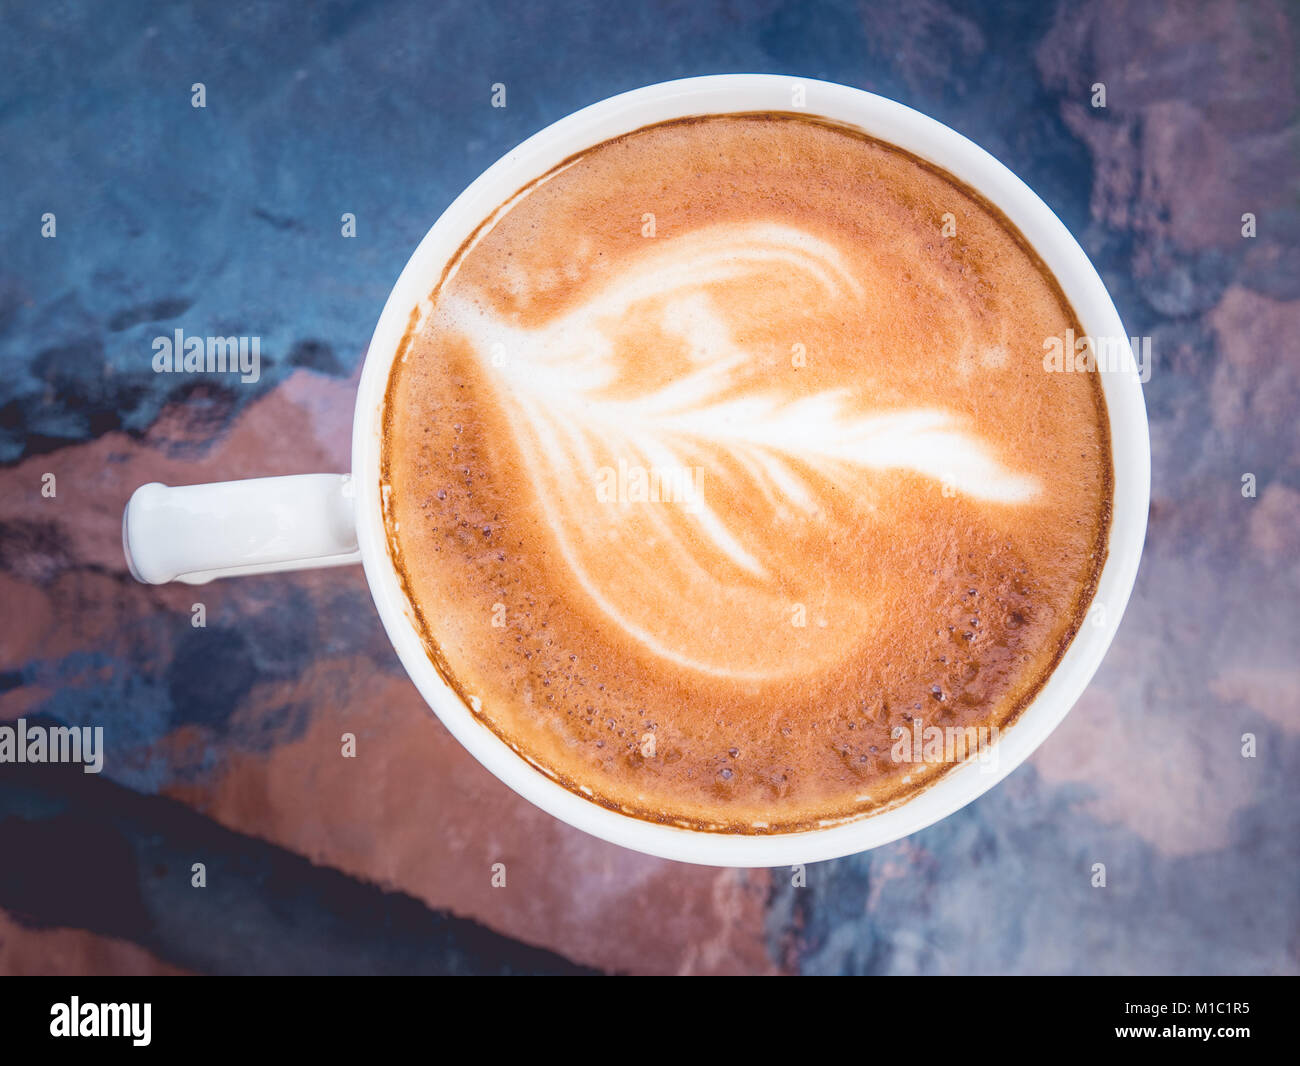 Hot coffee with latte art on table in coffee shop for background or cafe menu design. Stock Photo